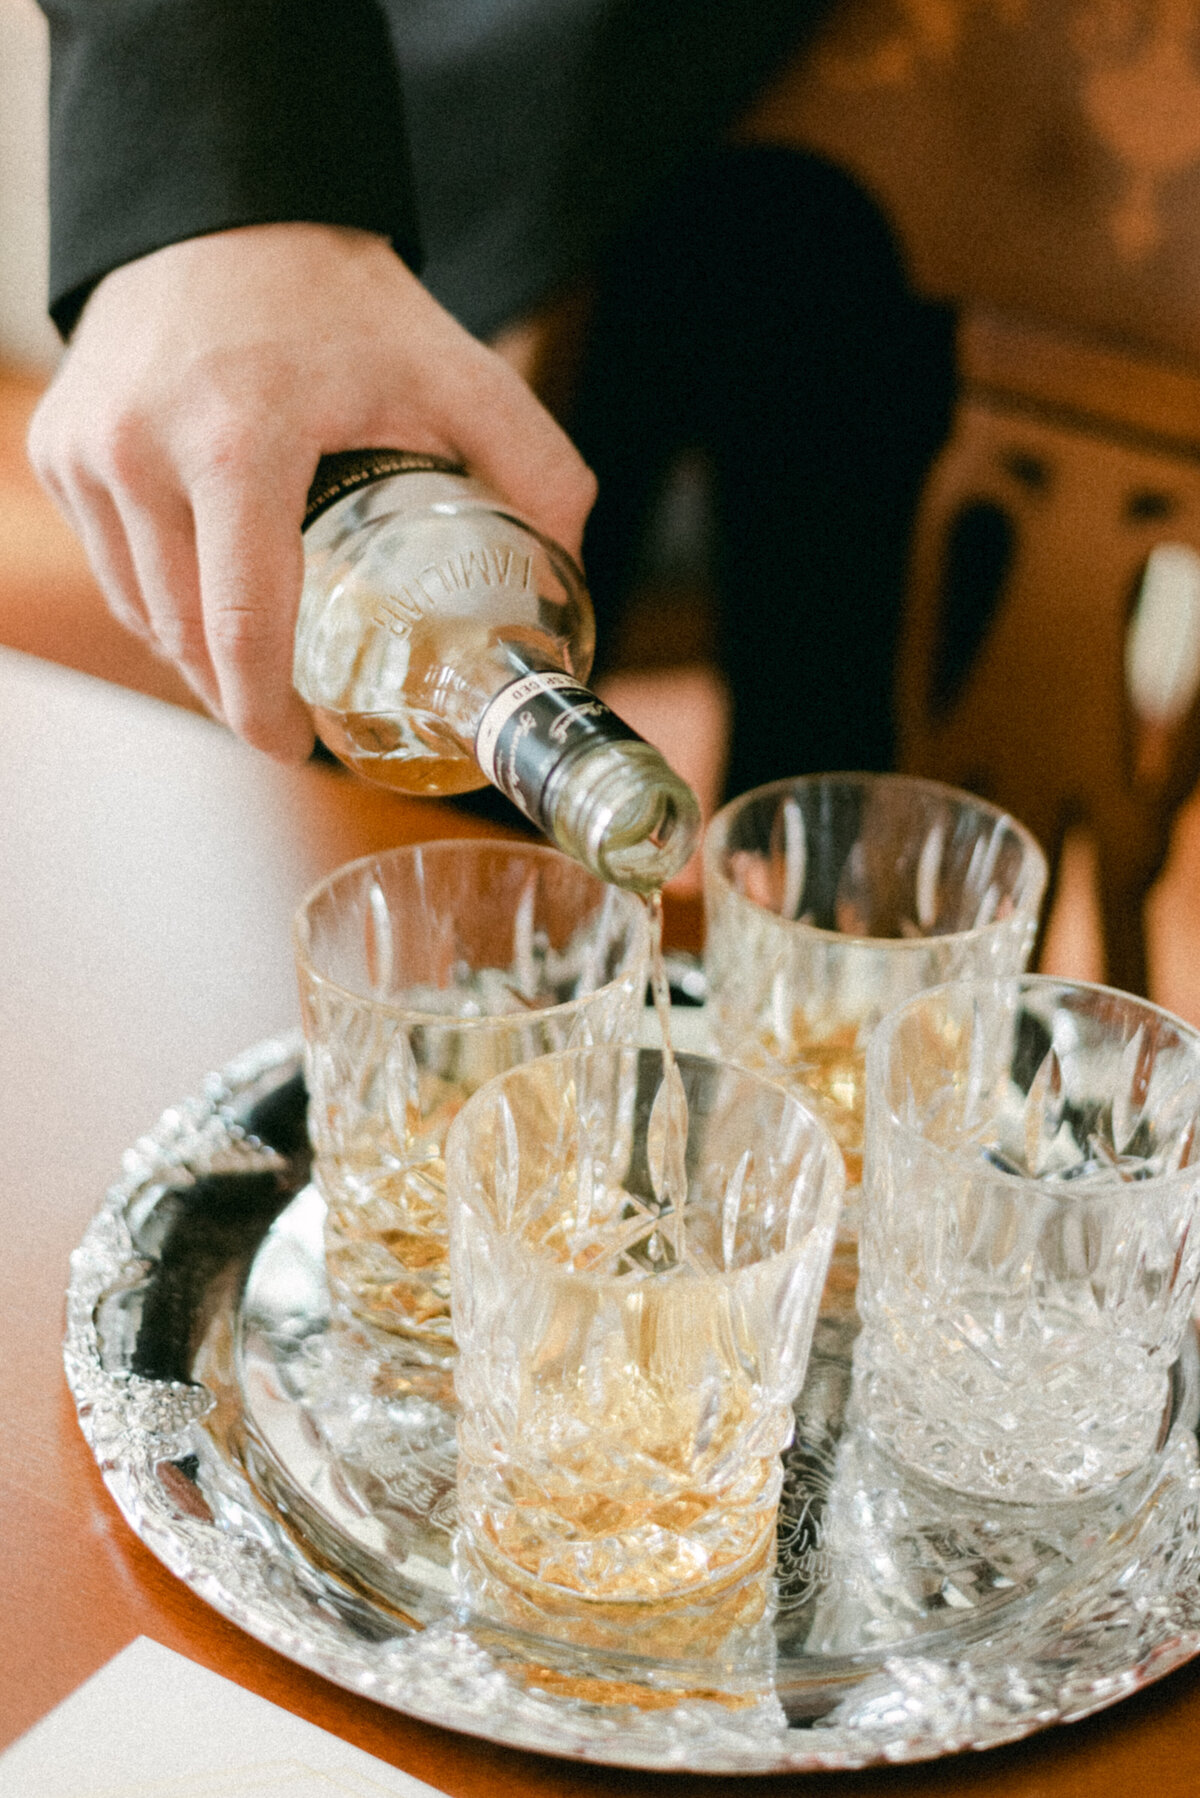 The groom is serving wisky in an image captured by wedding photographer Hannika Gabrielsson.